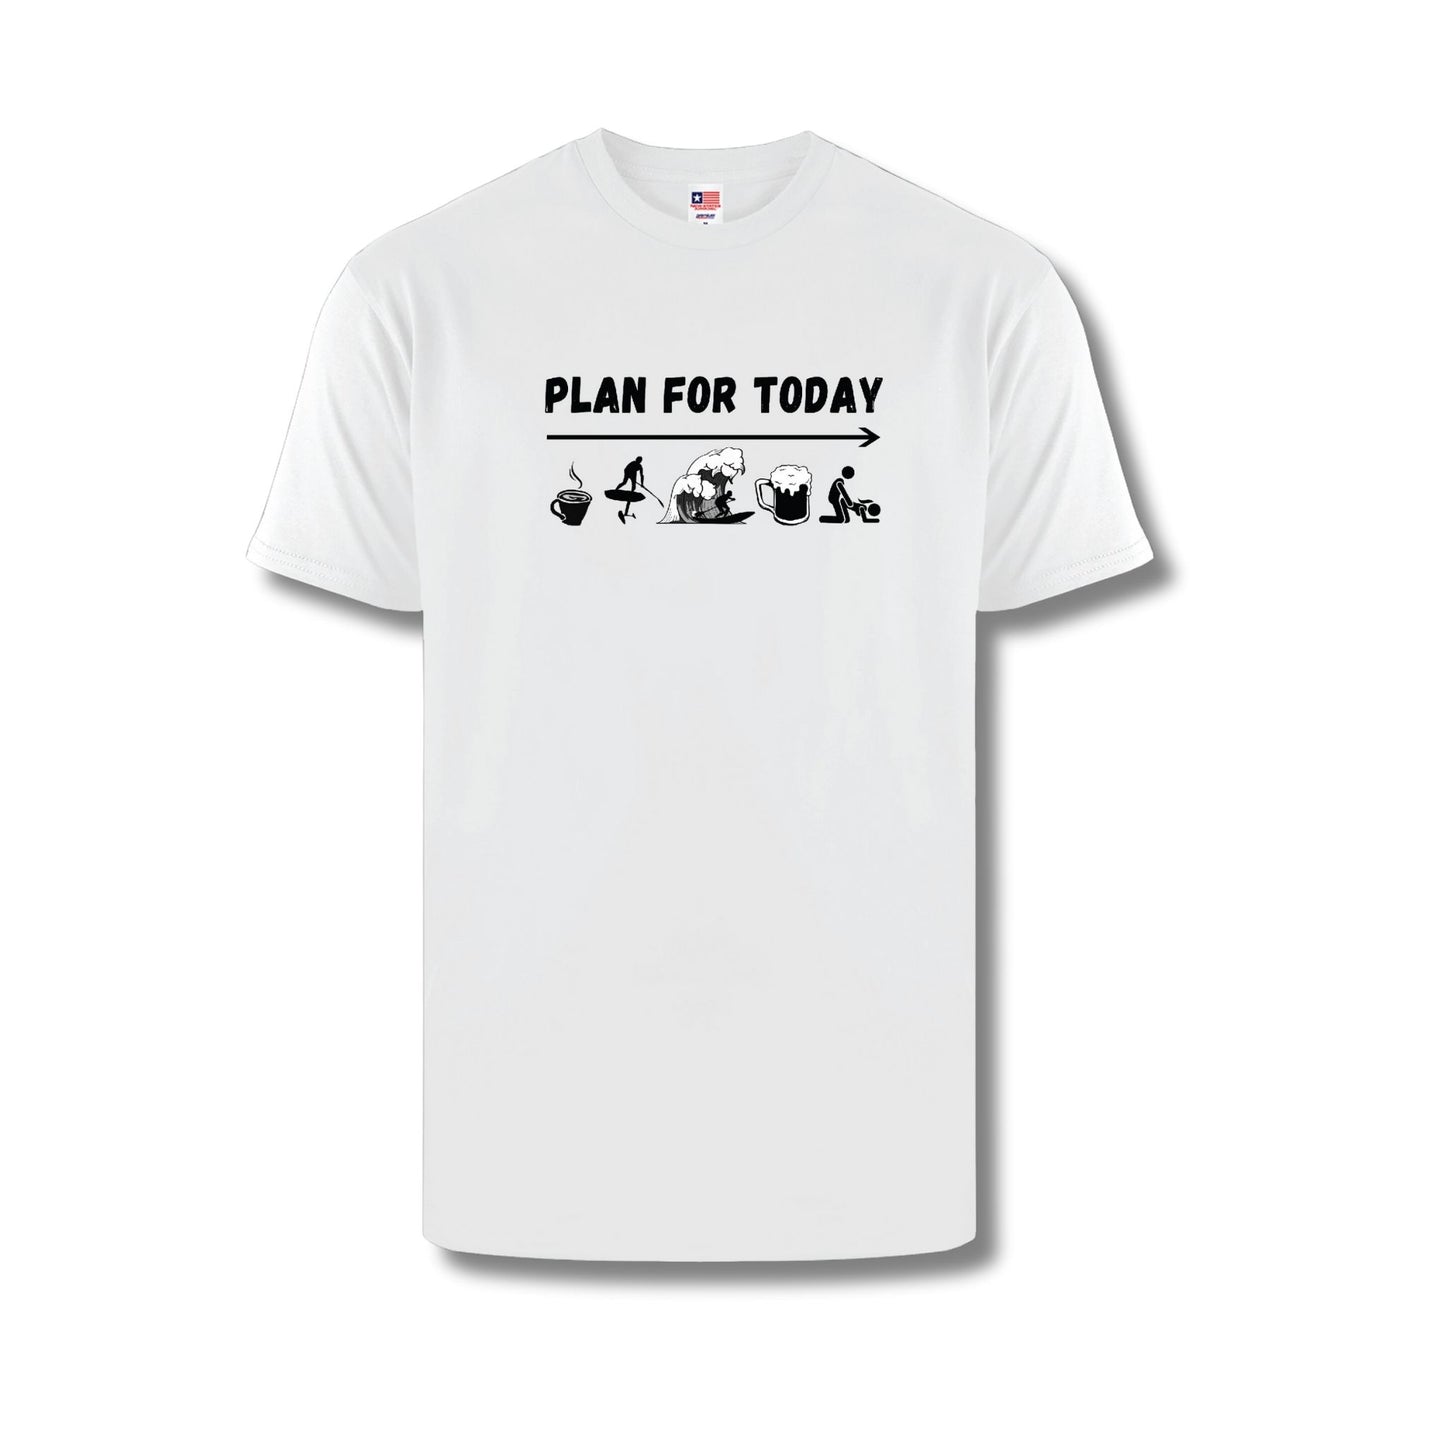 Priority SUP T-shirts | Plan For Today| Unisex S,M,L,XL,XXL